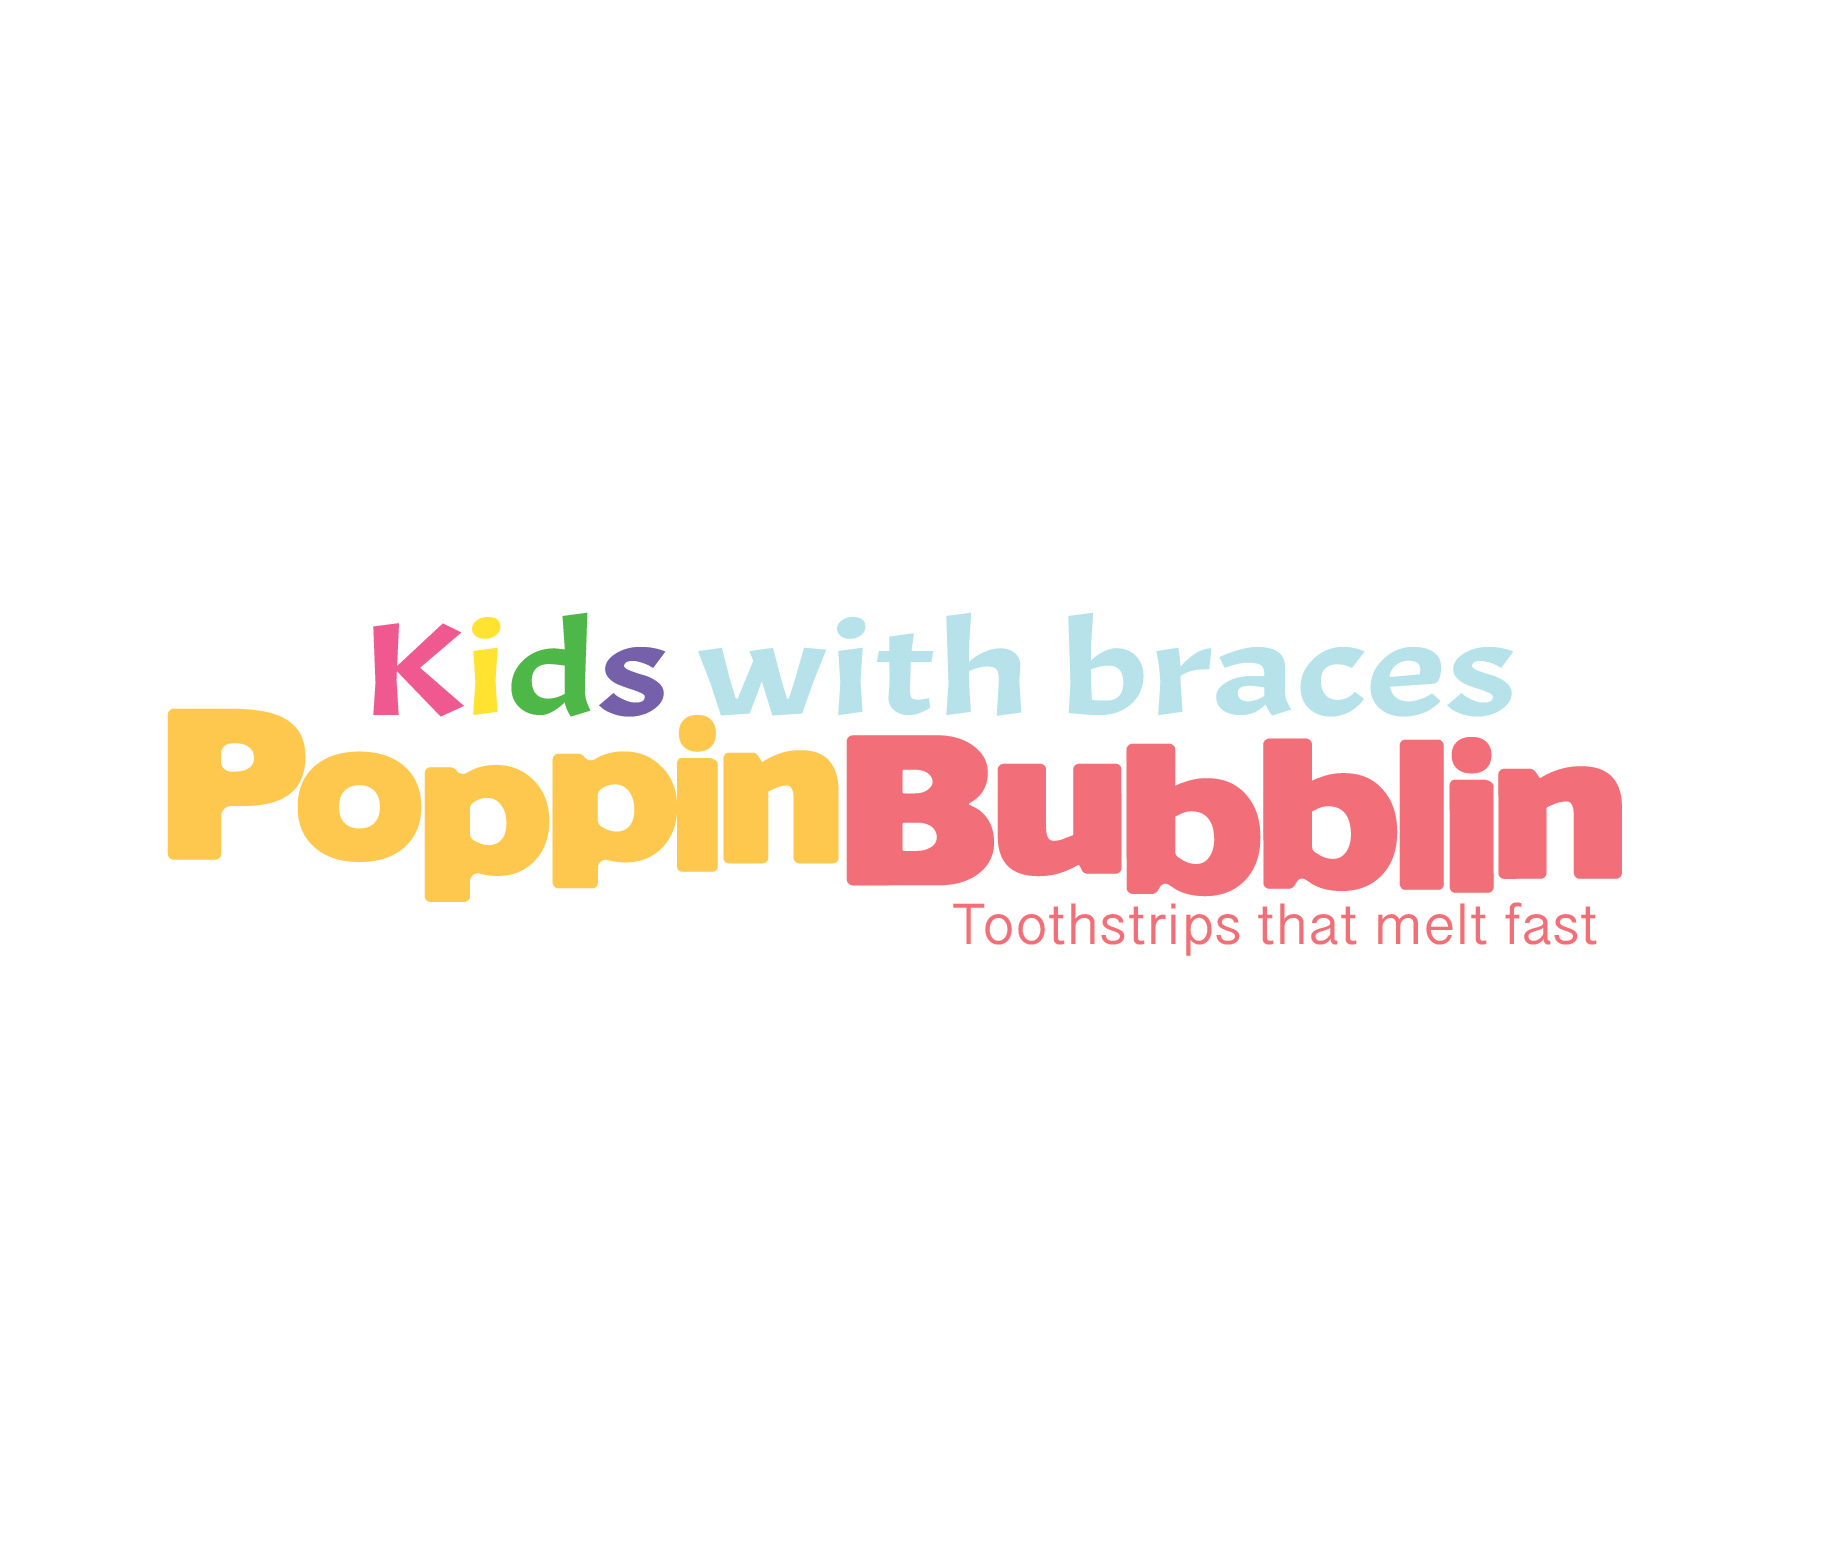 PoppinBubblin, a logo created for toothstrips for those who have traditional braces. These toothstrips encourge peopple to brush their teeth in an easy way without using a brush but instead using toothstrips that melt their teeth and easilly wash away with water. These toothstrips encourge peopple to brush their teeth in an easy way without using a brush but instead using toothstrips that melt their teeth and easilly wash away with water. These toothstrips encourge peopple to brush their teeth in an easy way without using a brush but instead using toothstrips that melt their teeth and easily wash away with water. 